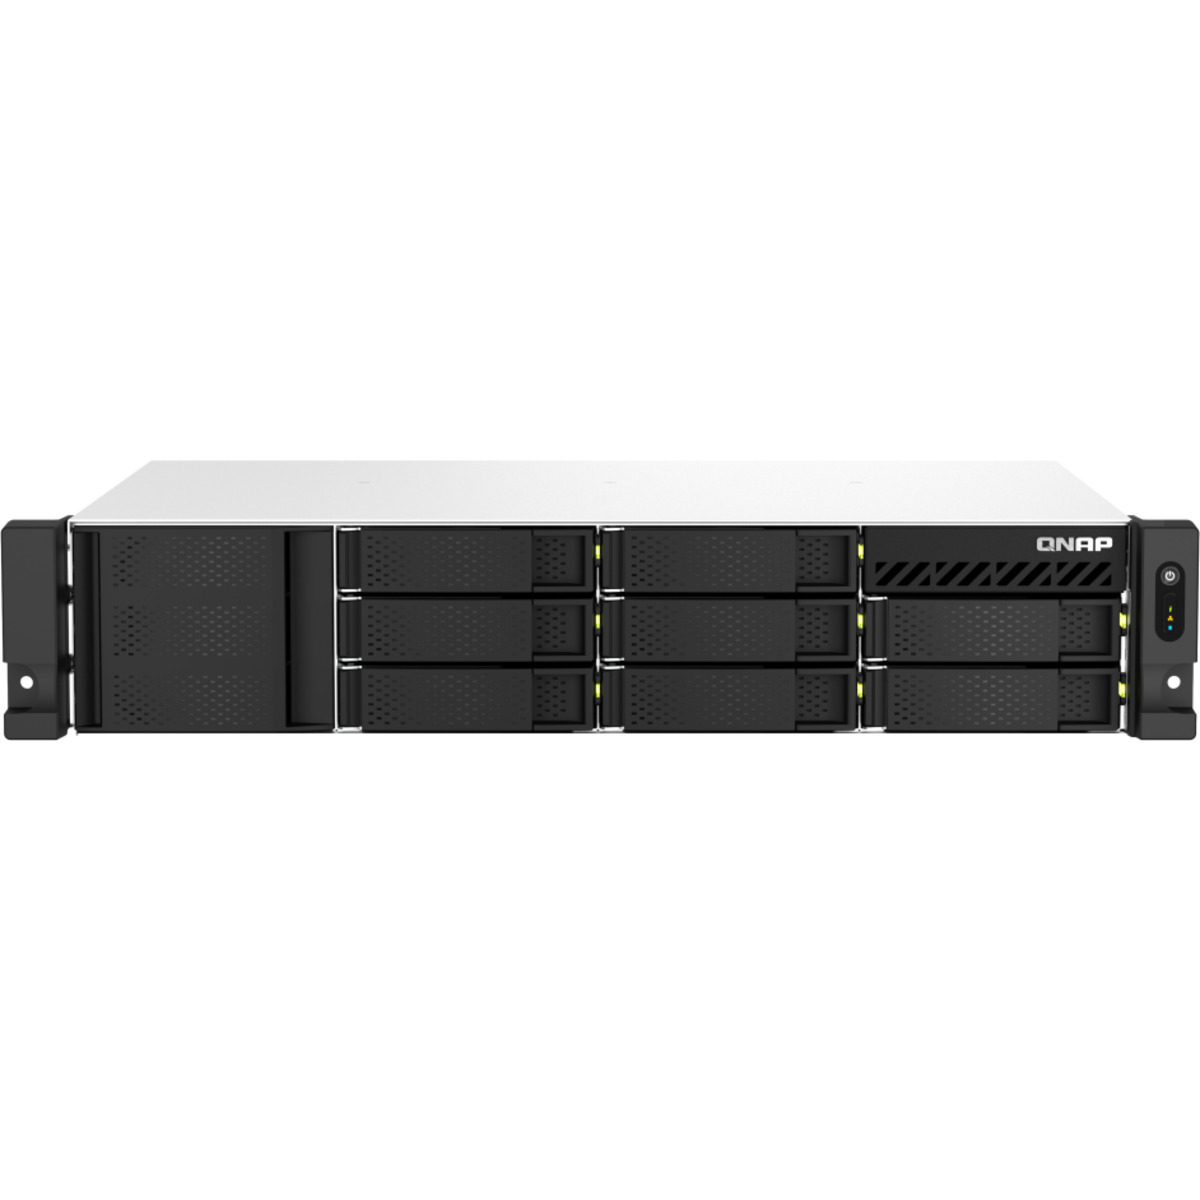 buy $5453 QNAP TS-873AeU-RP 160tb RackMount NAS - Network Attached Storage Device 8x20000gb Western Digital Red Pro WD201KFGX 3.5 7200rpm SATA 6Gb/s HDD NAS Class Drives Installed - Burn-In Tested - FREE RAM UPGRADE - nas headquarters buy network attached storage server device das new raid-5 free shipping usa TS-873AeU-RP